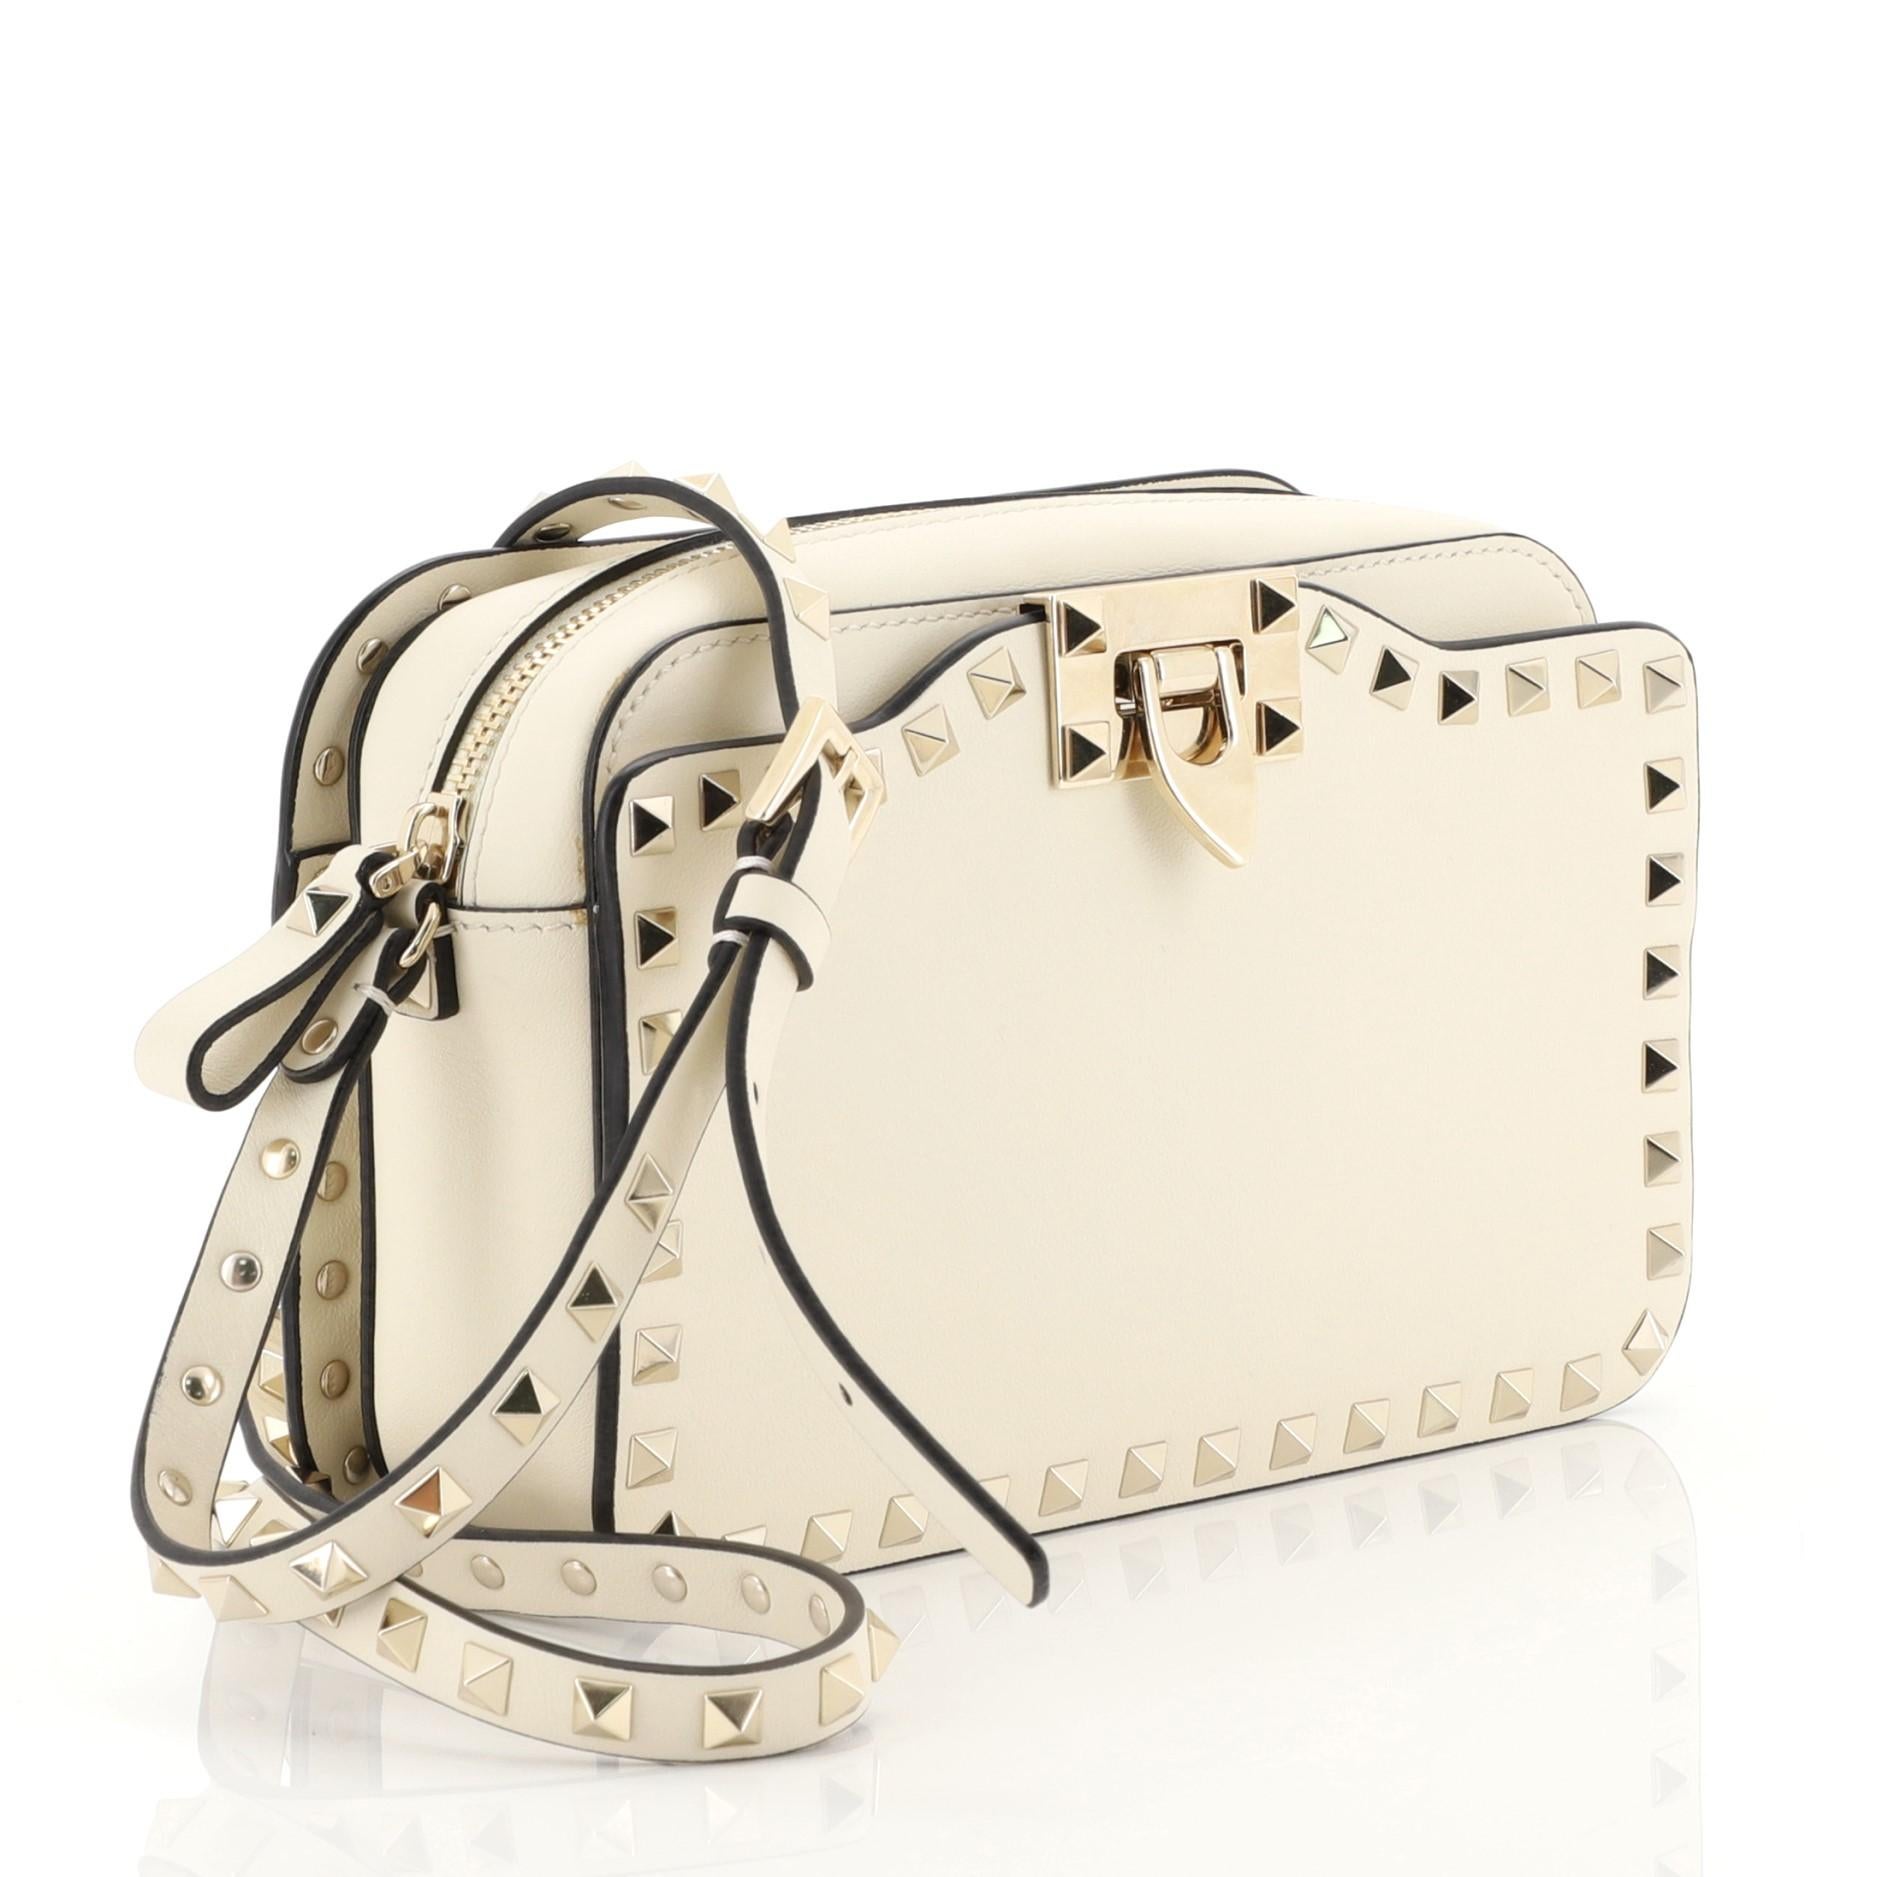 This Valentino Rockstud Camera Crossbody Bag Leather, crafted from white leather, features an adjustable strap, pyramid rockstud detailing, and gold-tone hardware. Its zip closure opens to a neutral fabric interior with slip pocket. 

Estimated